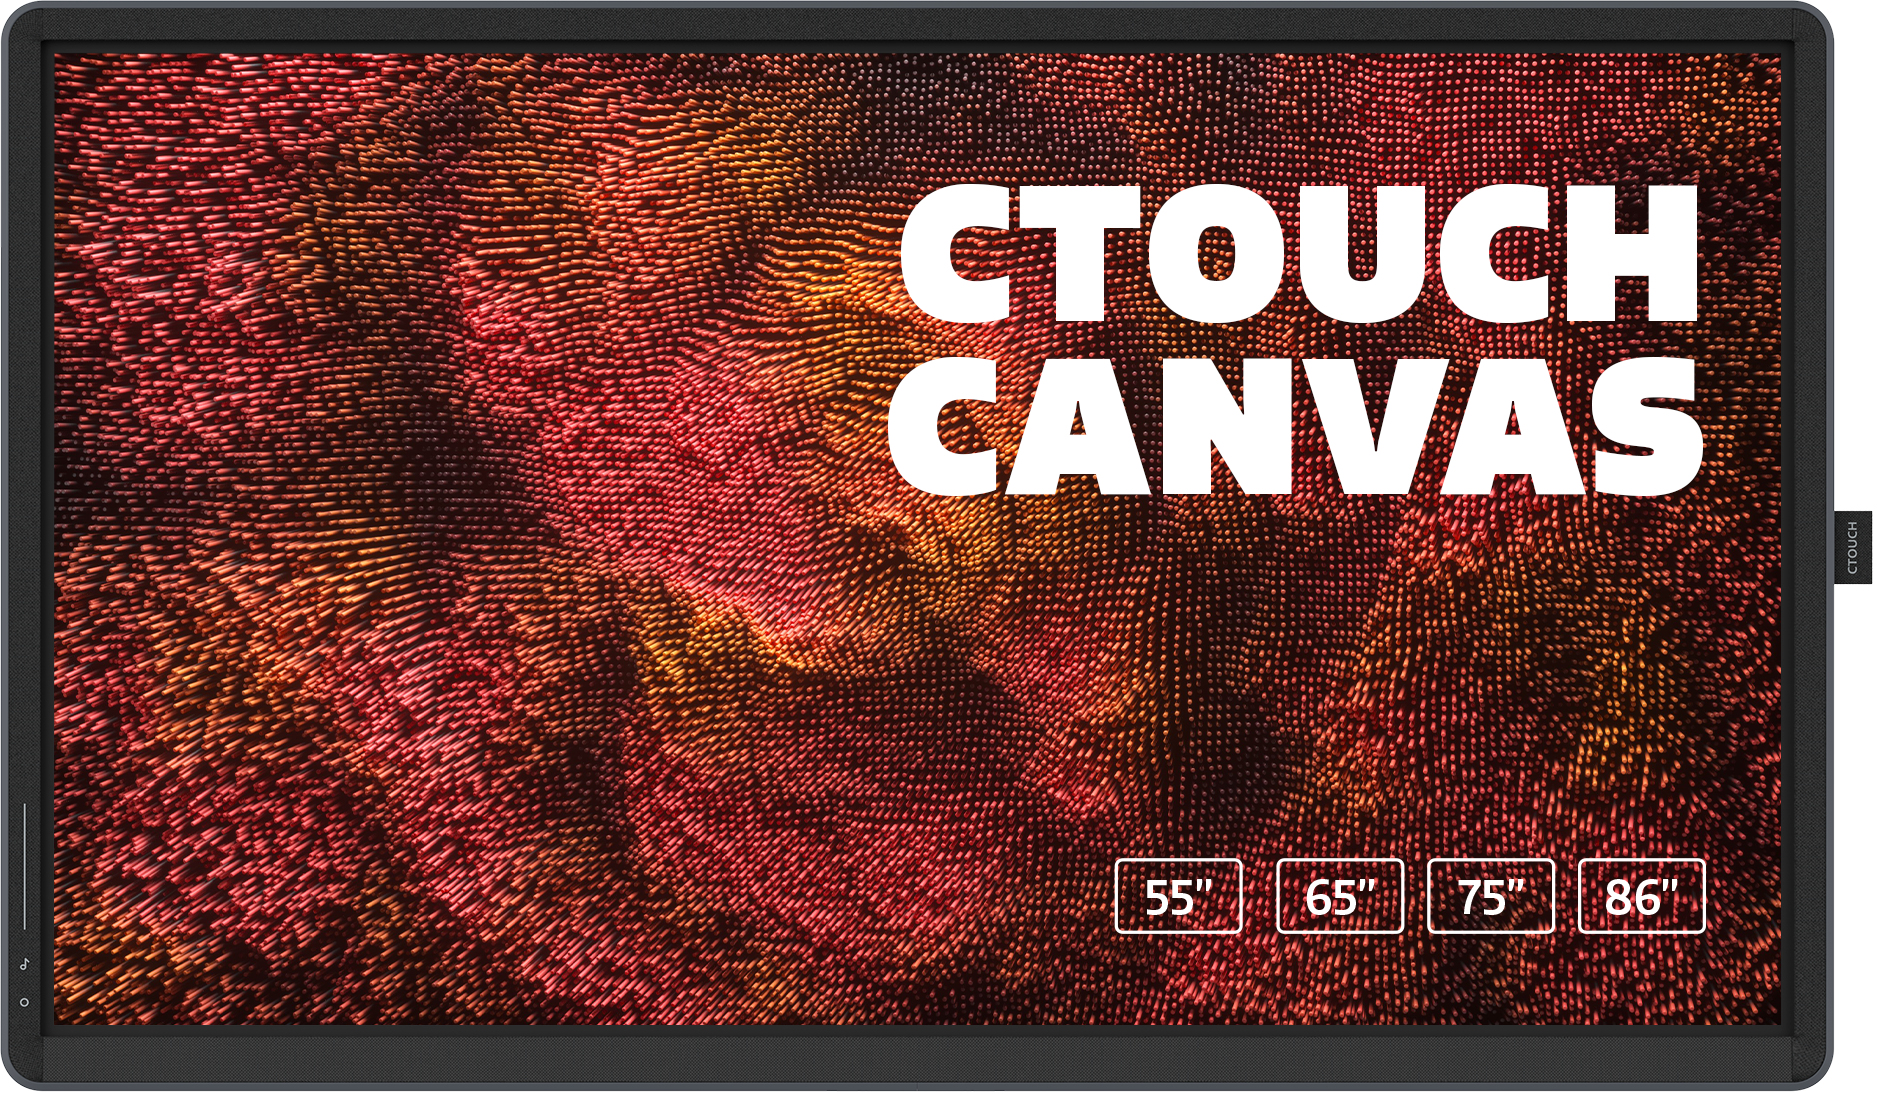 CTOUCH Canvas - 65 Zoll - 350 cd/m² - Ultra-HD - 4K - 3840x2160 - NO-OS-Betriebssystem - 20 Punkt - Touch Display - Midnight Grey